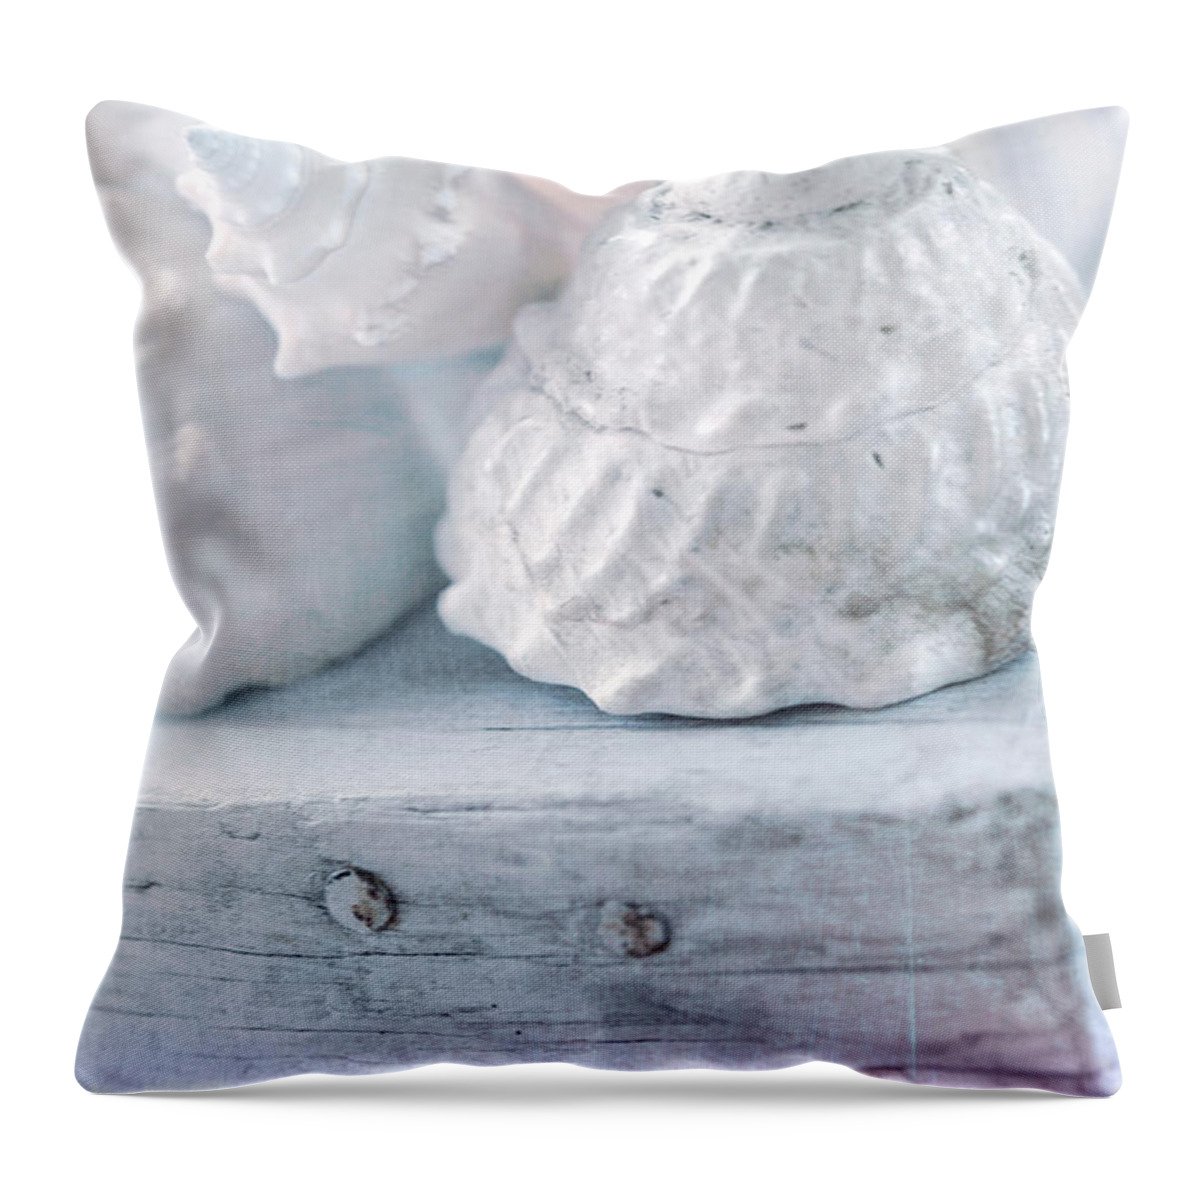 Sea Shells Throw Pillow featuring the photograph Shells on Wooden Crate by Bonnie Bruno